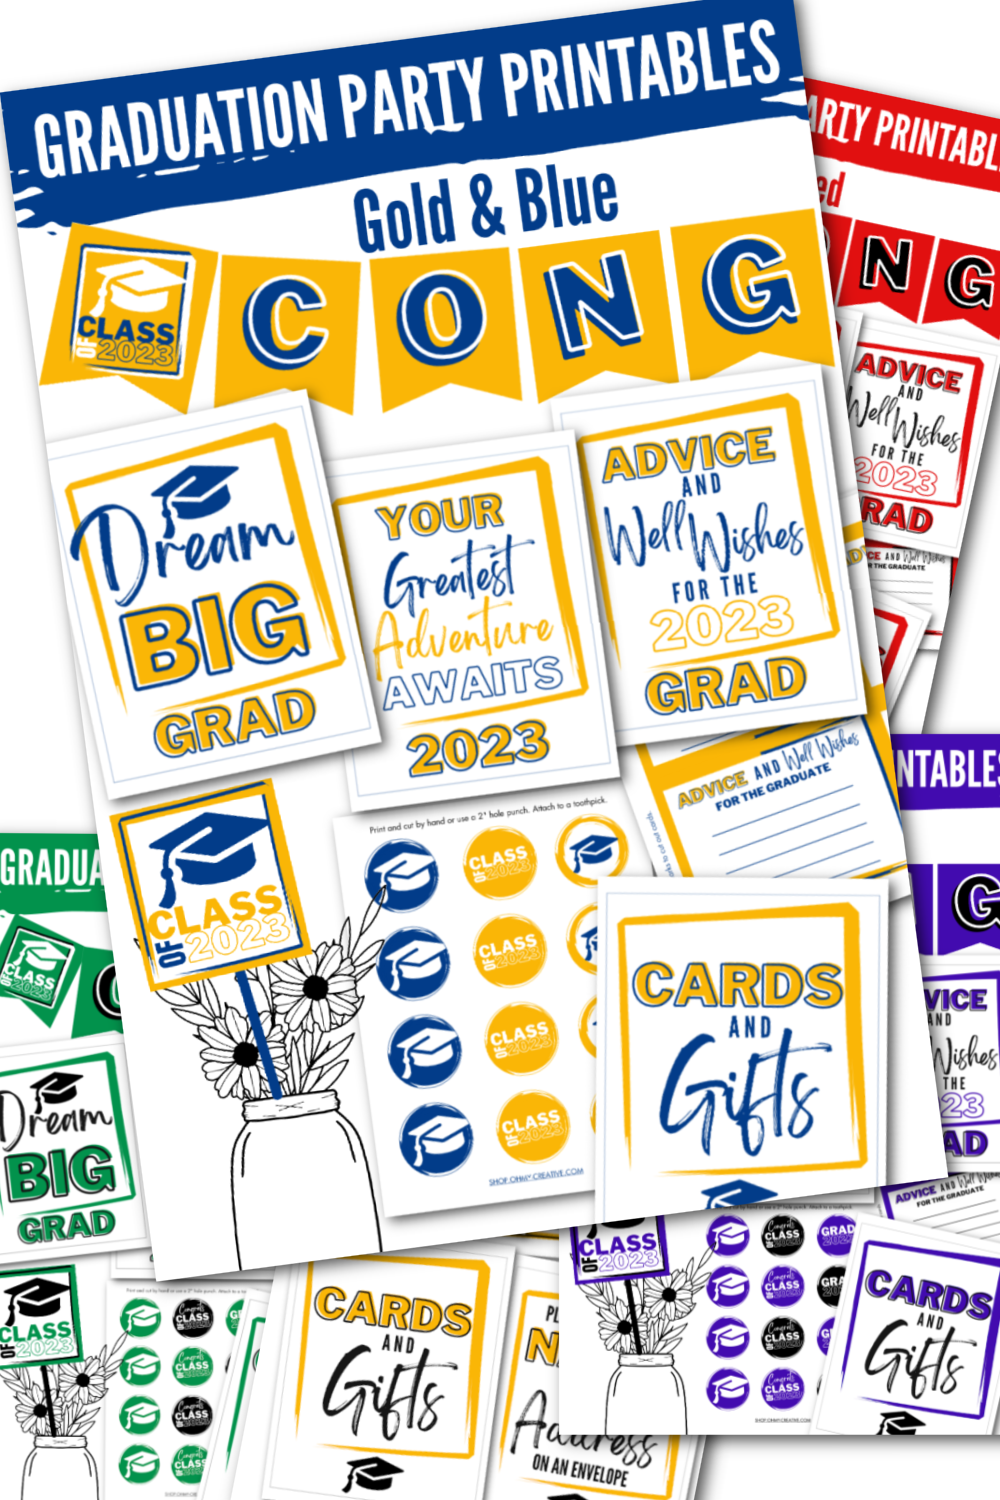 A collage of graduation party printable decorations in several school color combinations.